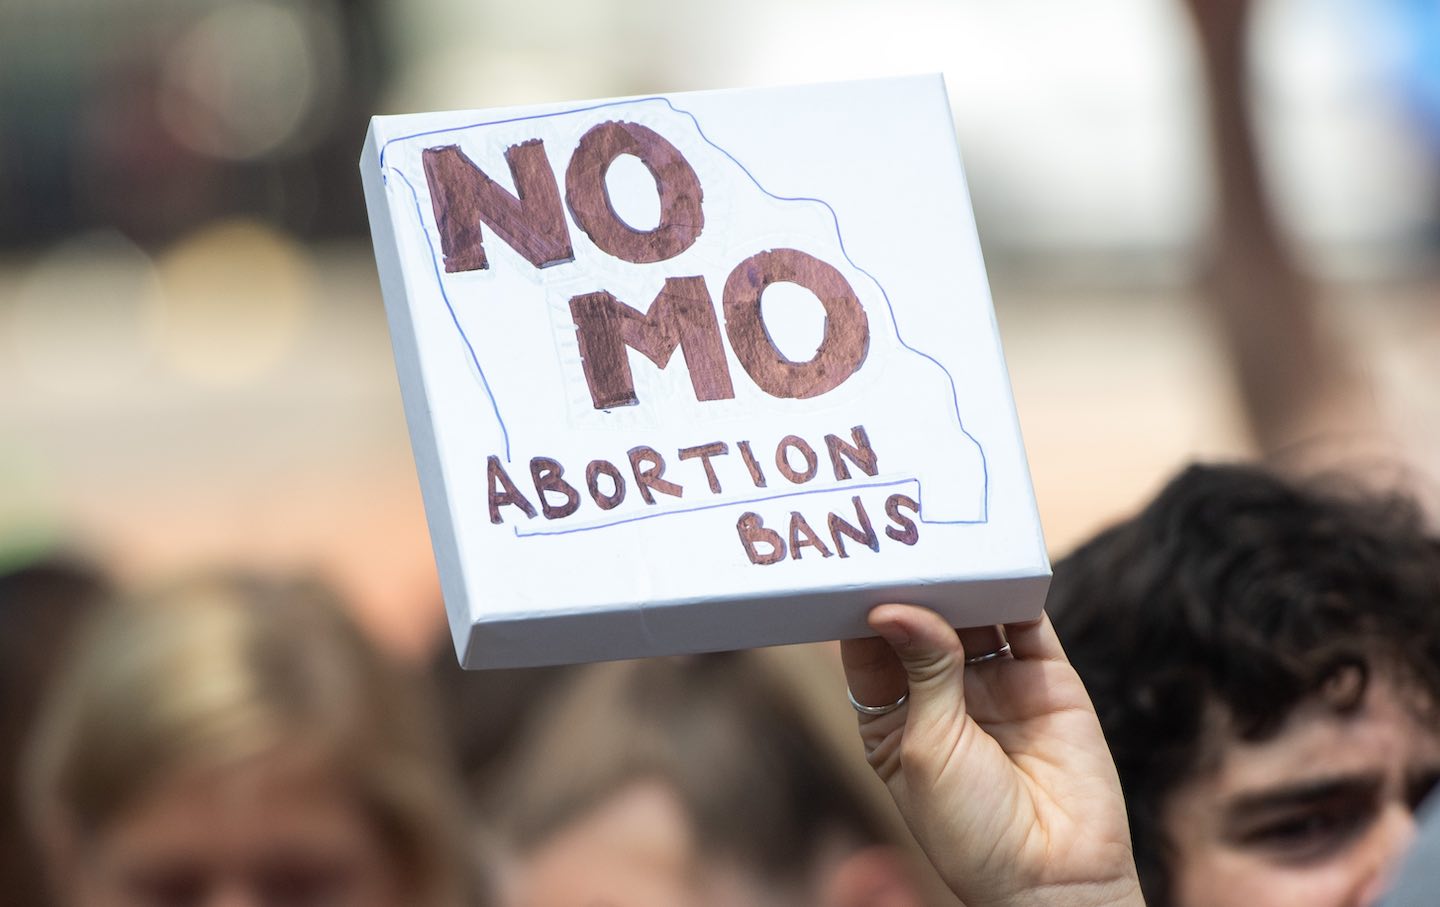 An abortion-rights protester holding a “No MO Abortion Bans” sign at a pro-choice rally in St. Louis, Missouri, on May 30, 2019.